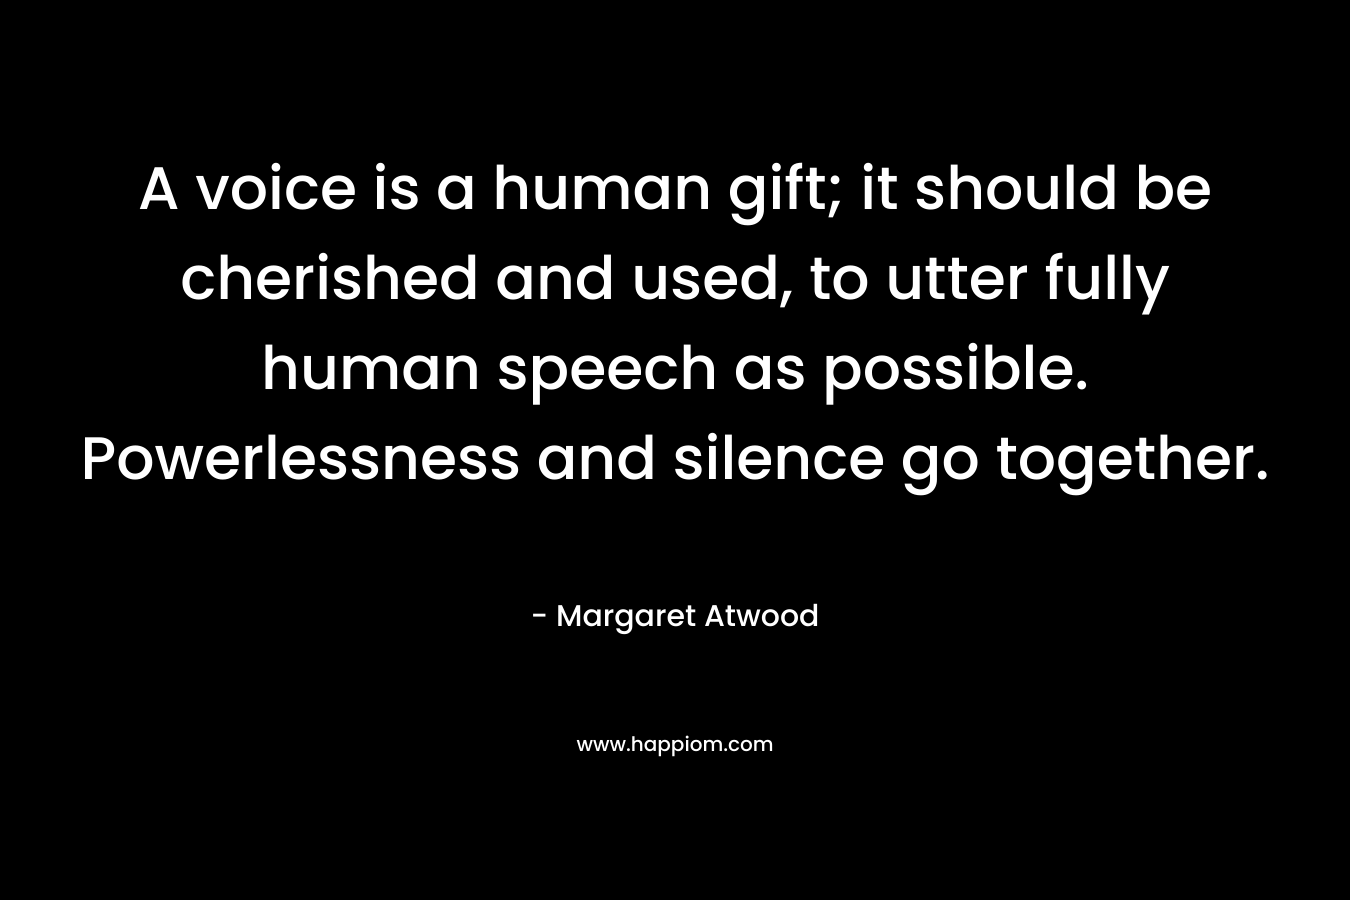 A voice is a human gift; it should be cherished and used, to utter fully human speech as possible. Powerlessness and silence go together. – Margaret Atwood